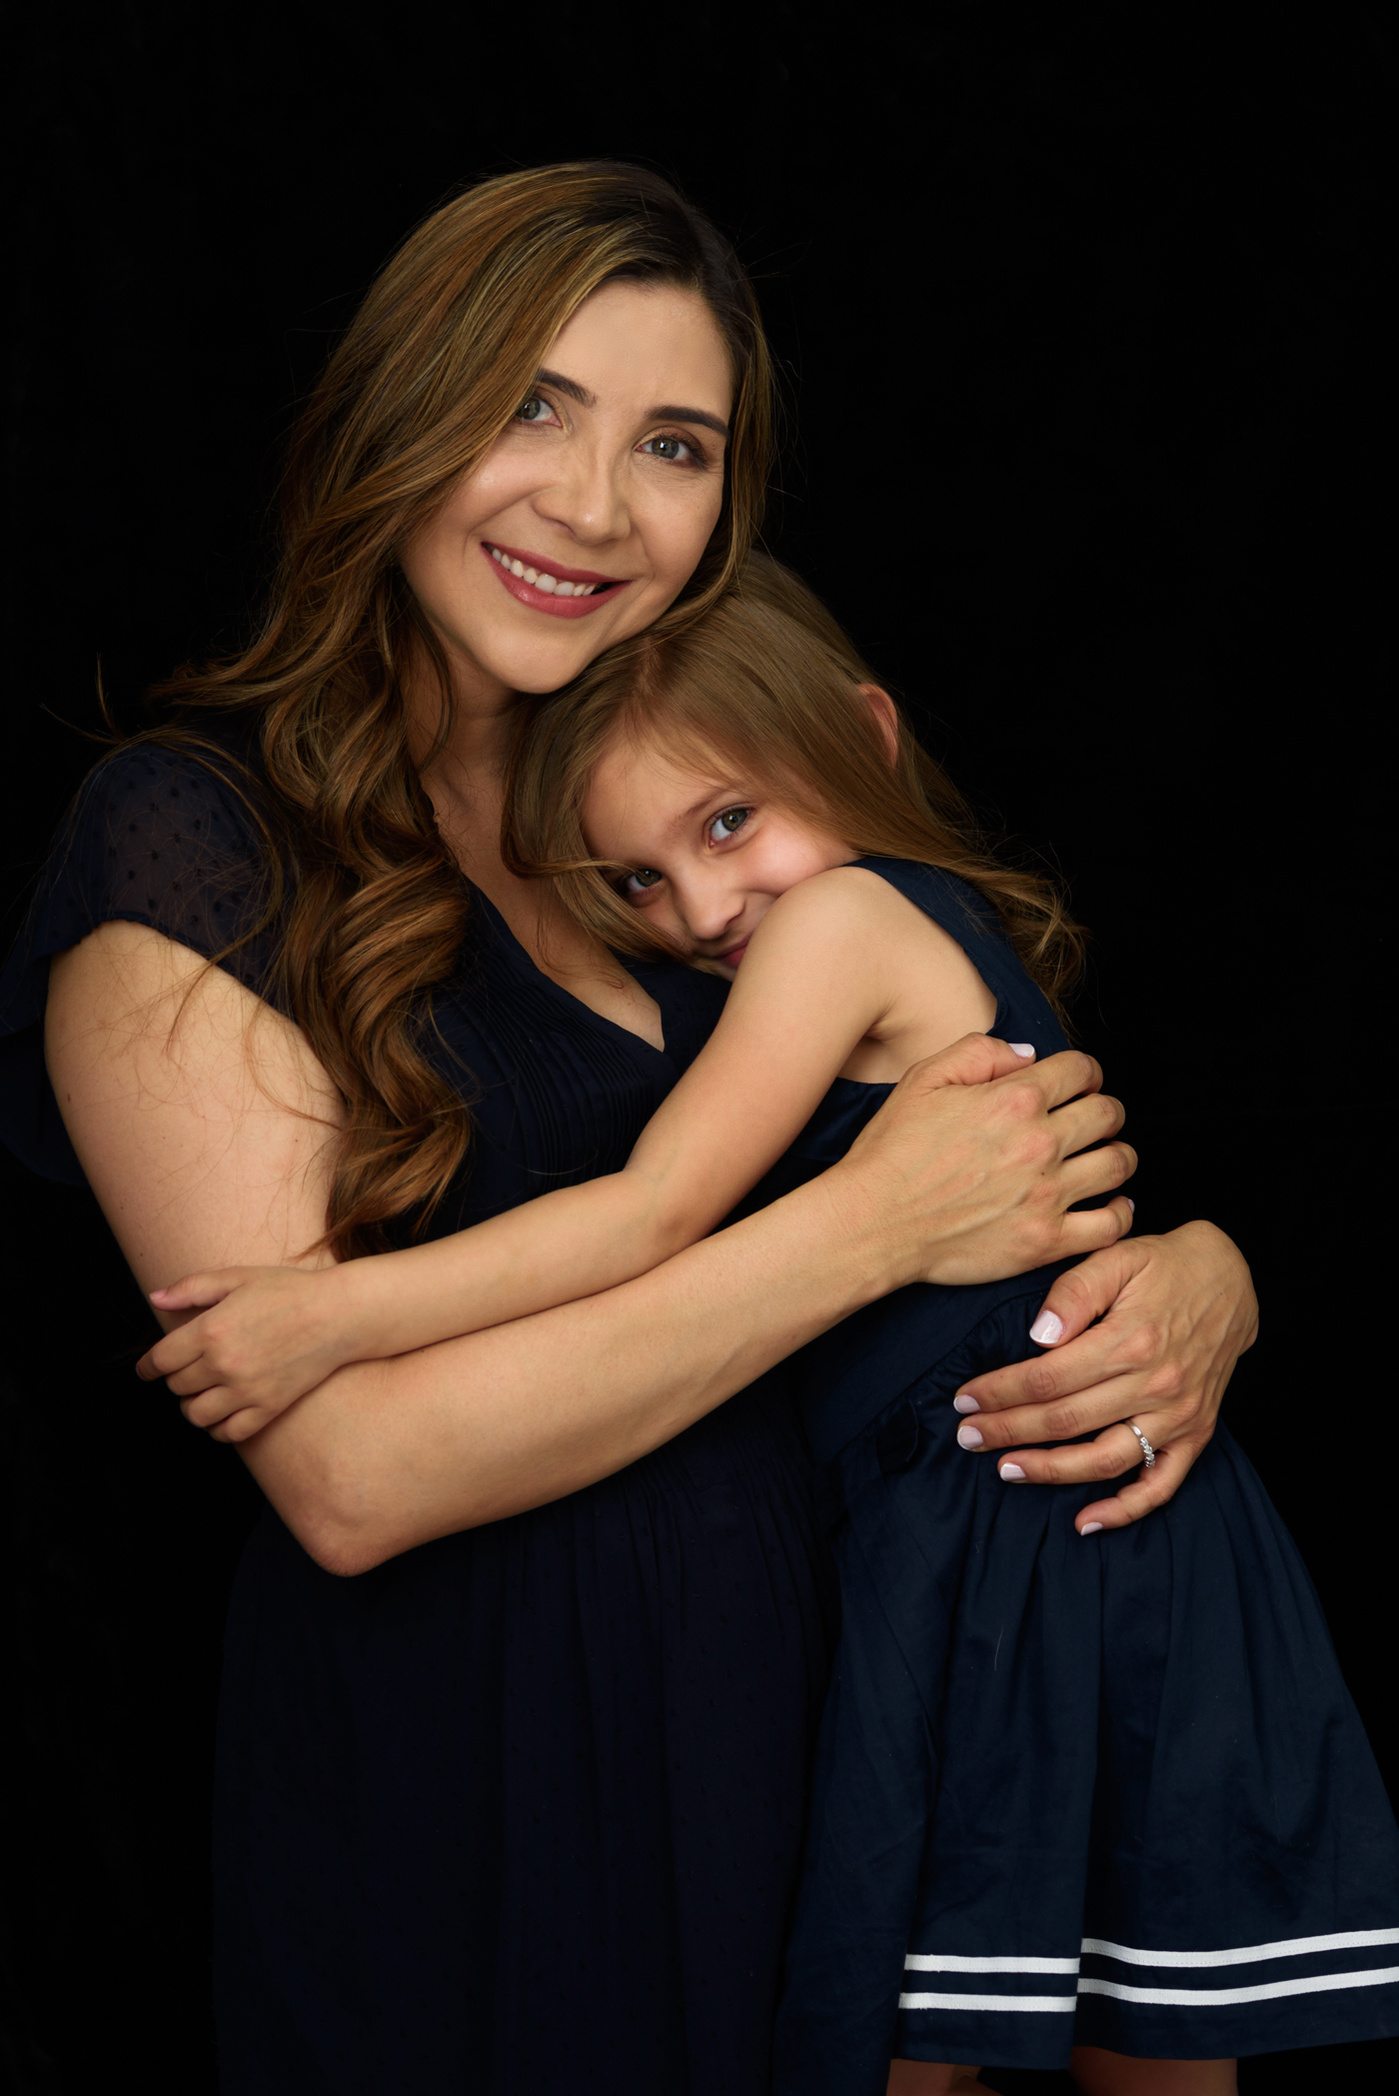 Fine-art Mummy and Me portrait. Mother photographed with her daughter on a black velvet background on the occasion of Mother's Day. We created heirloom portraits as Wall Art to remind the family everyday of their love for each other.